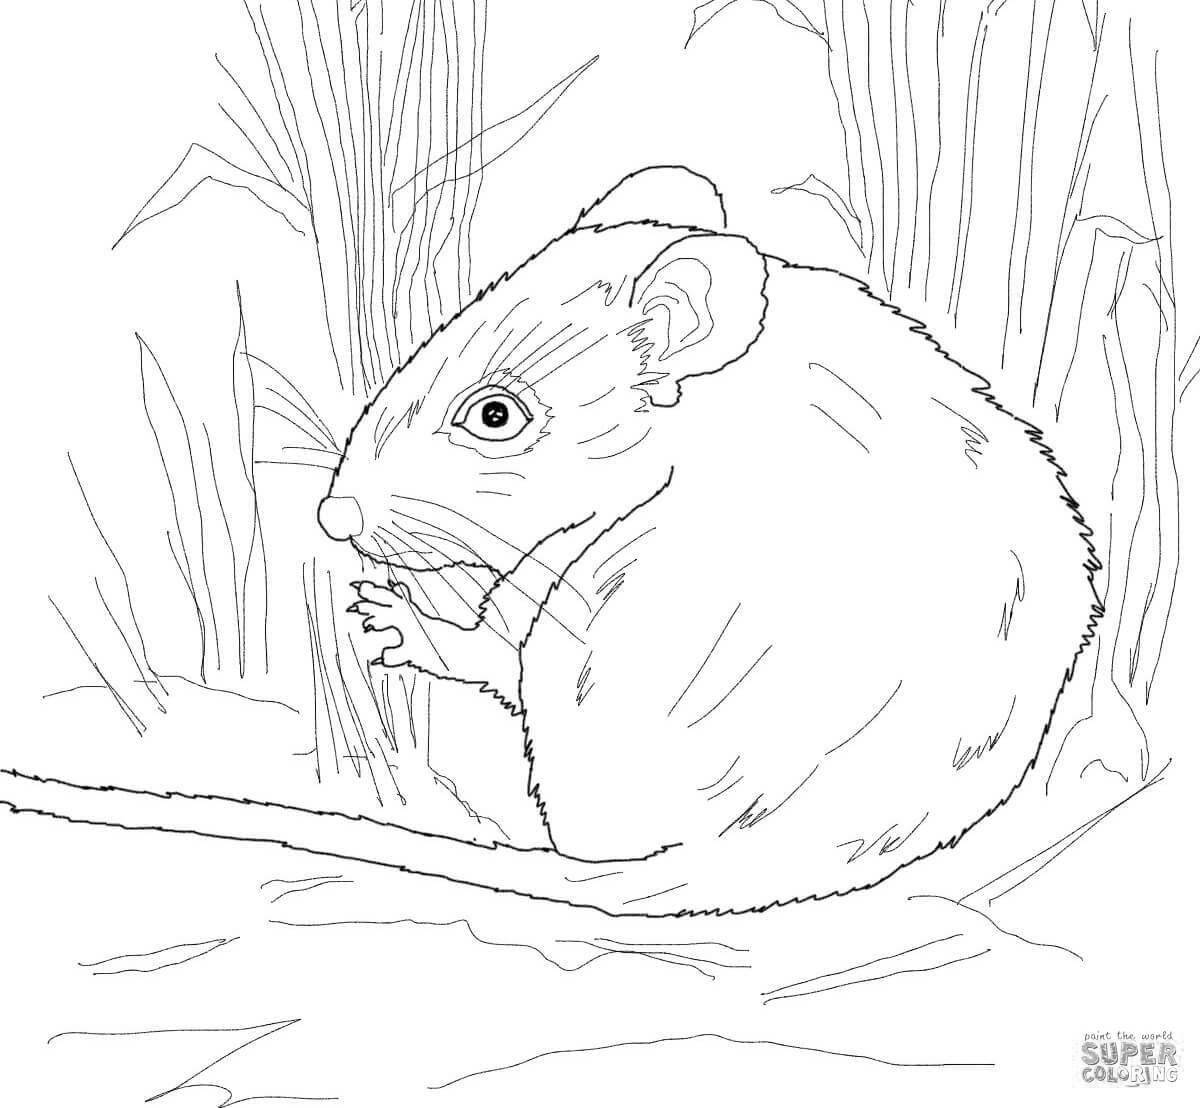 Delightful harvest mouse coloring page